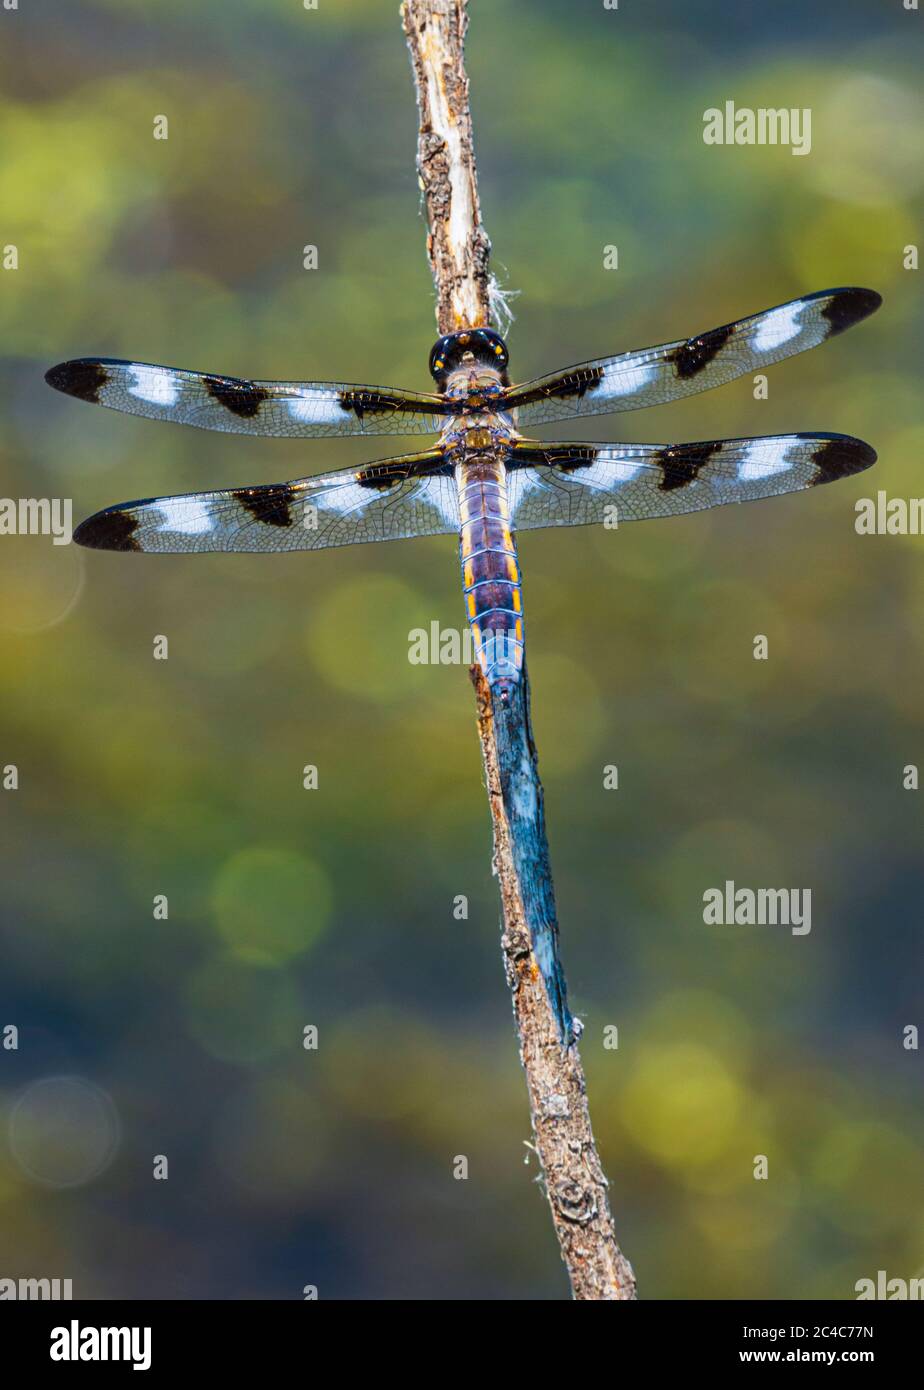 Twelve-Spotted skimmer dragonfly (Libellula pulchella) resting on willow stem in wetland pond, Castle Rock Colorado USA. Photo taken in June. Stock Photo